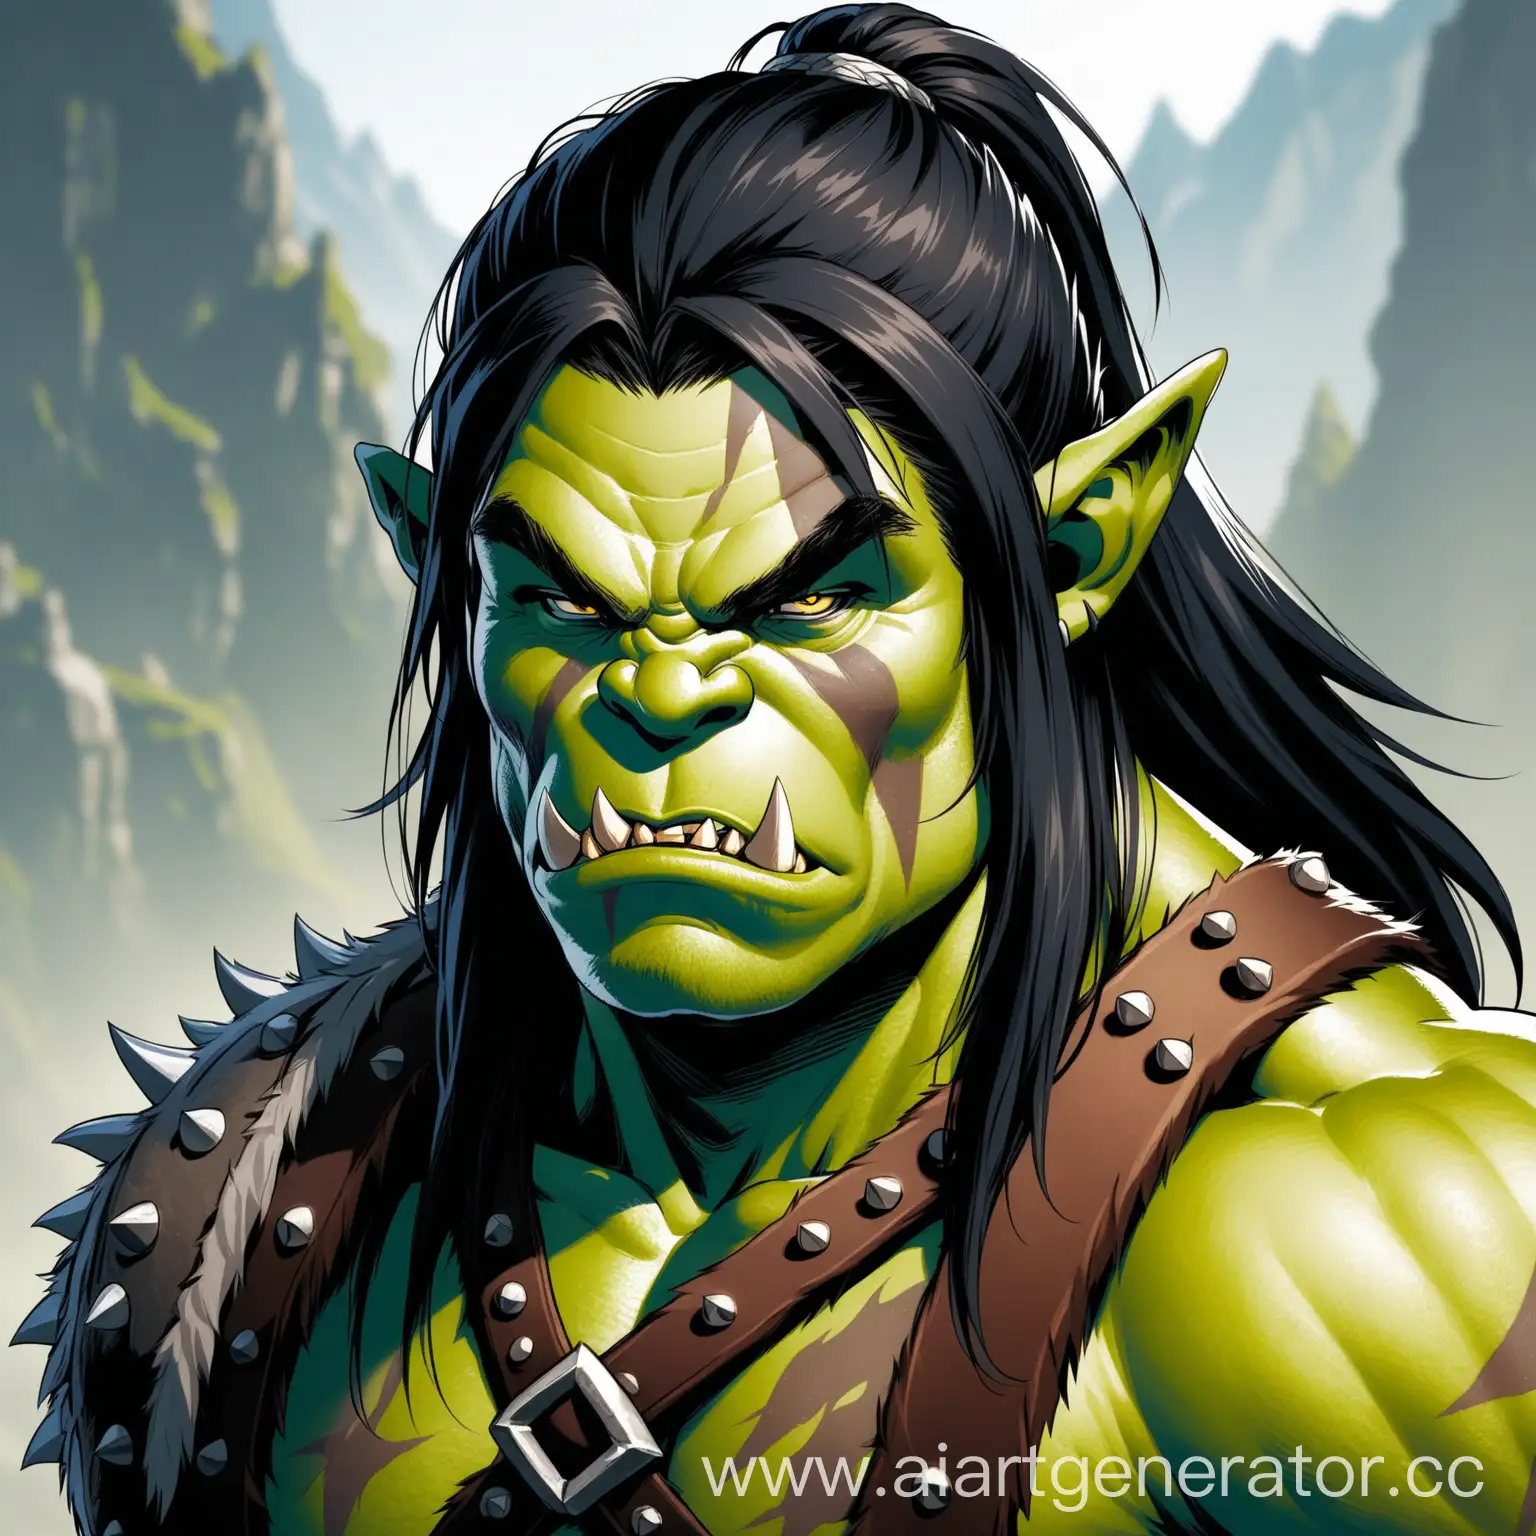 Fierce-Young-Orc-Barbarian-with-Scars-and-Long-Black-Hair